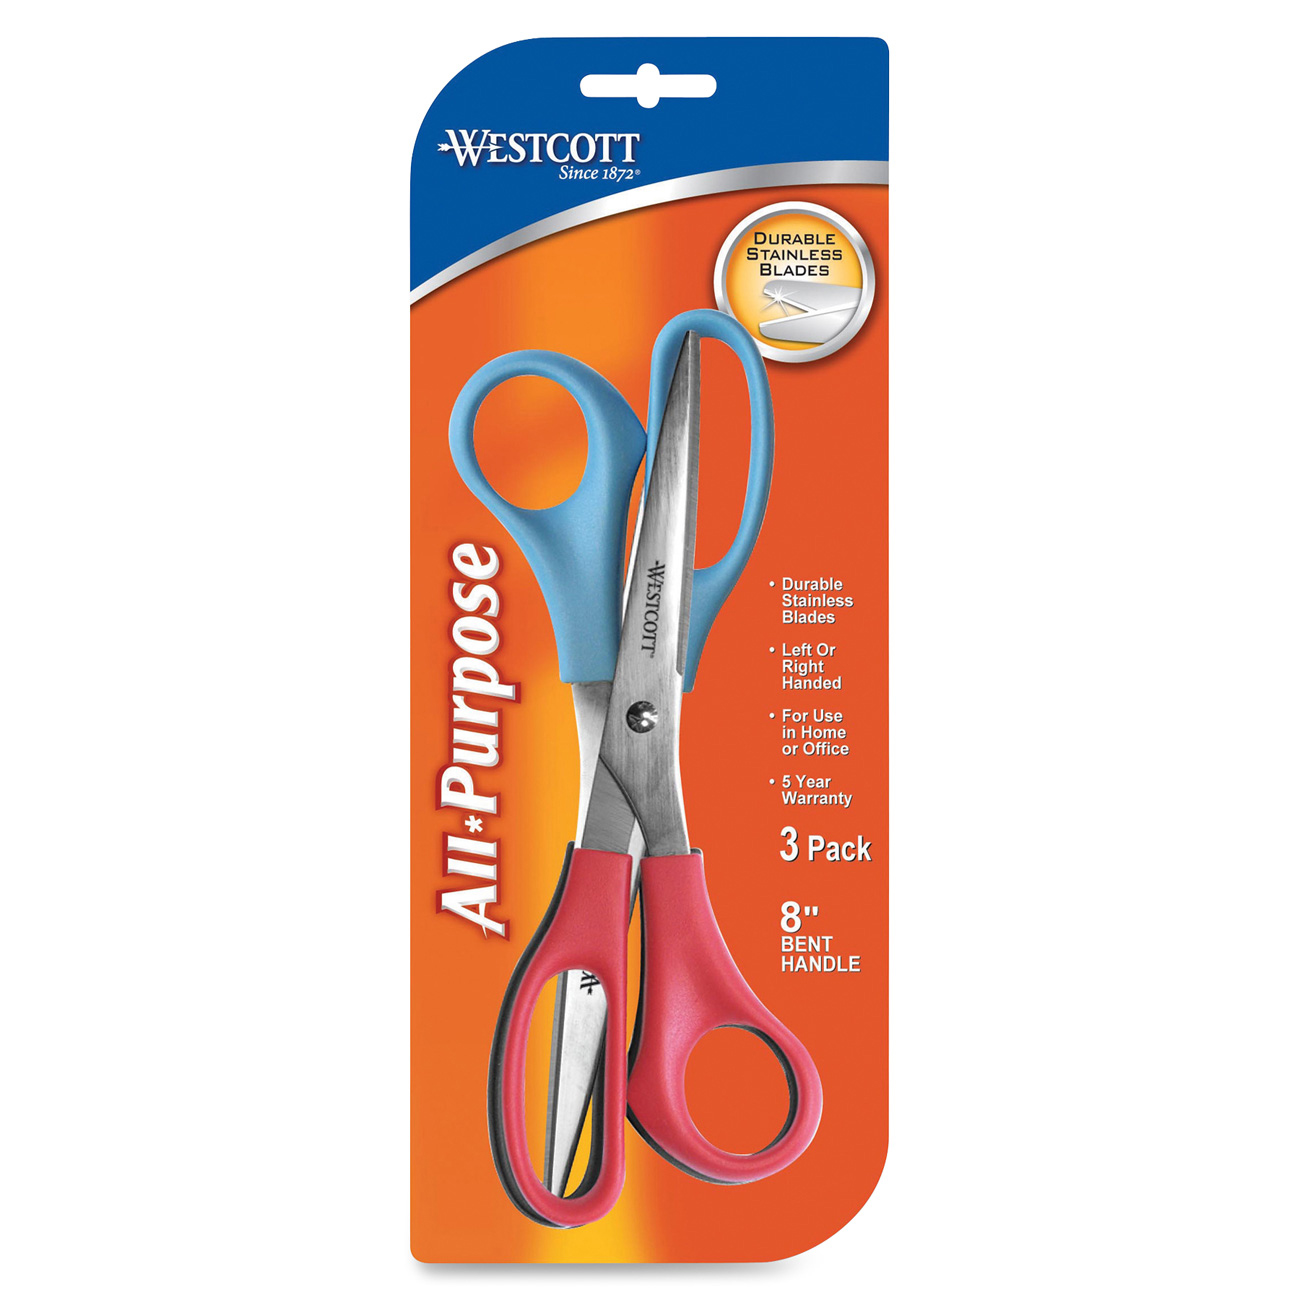 Westcott All Purpose Value Scissors, 8", Straight, 3-Pack, Assorted Colors - image 5 of 8